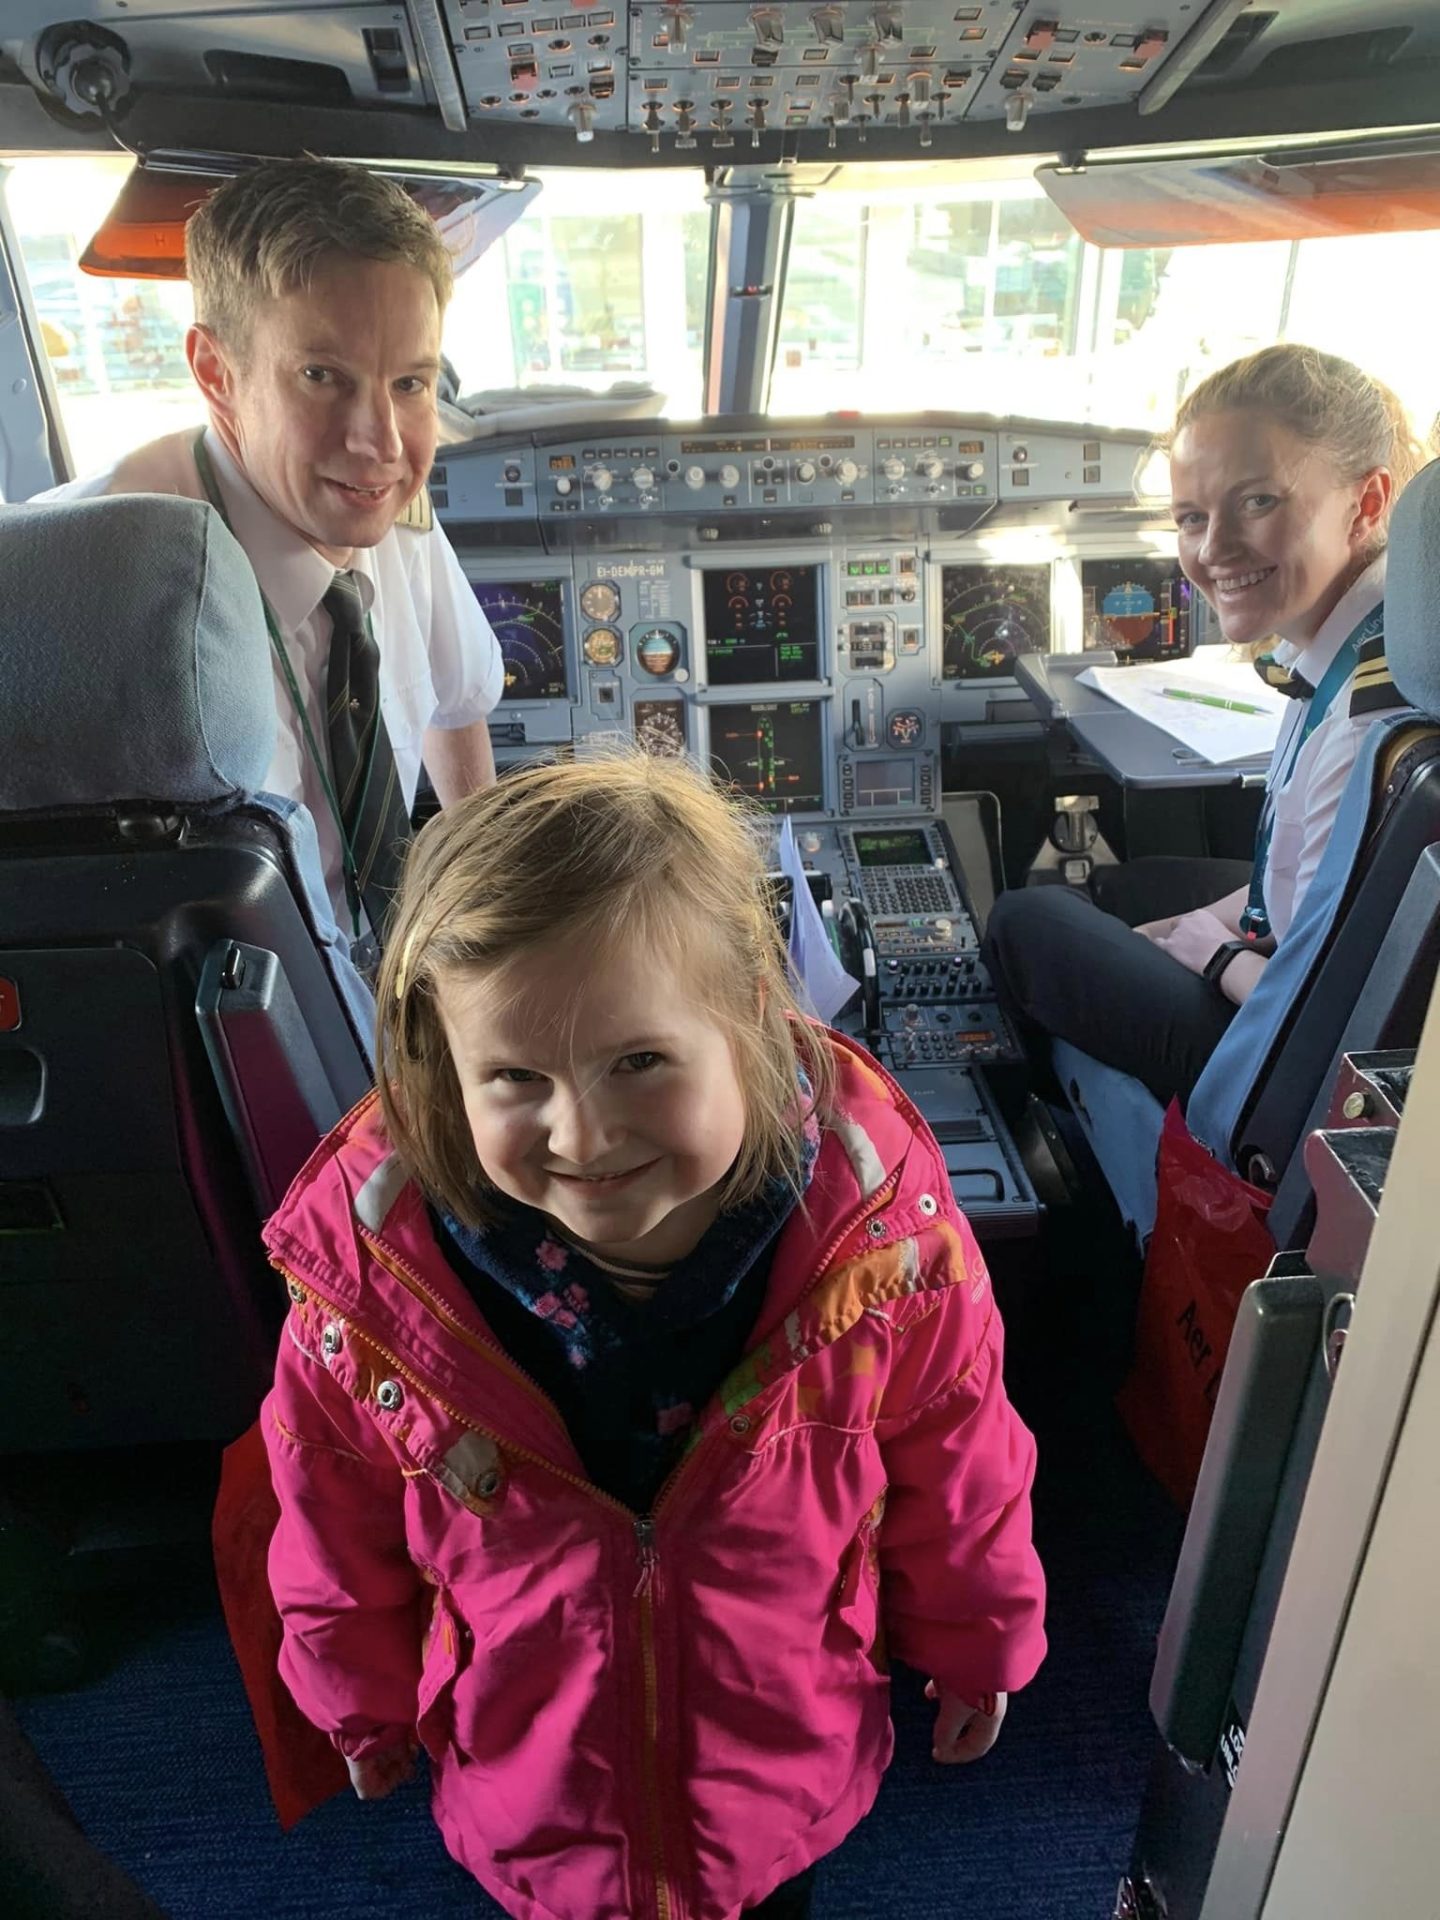 Rachel McGovern in an Aer Lingus cockpit on one of her trips to Birmingham in England